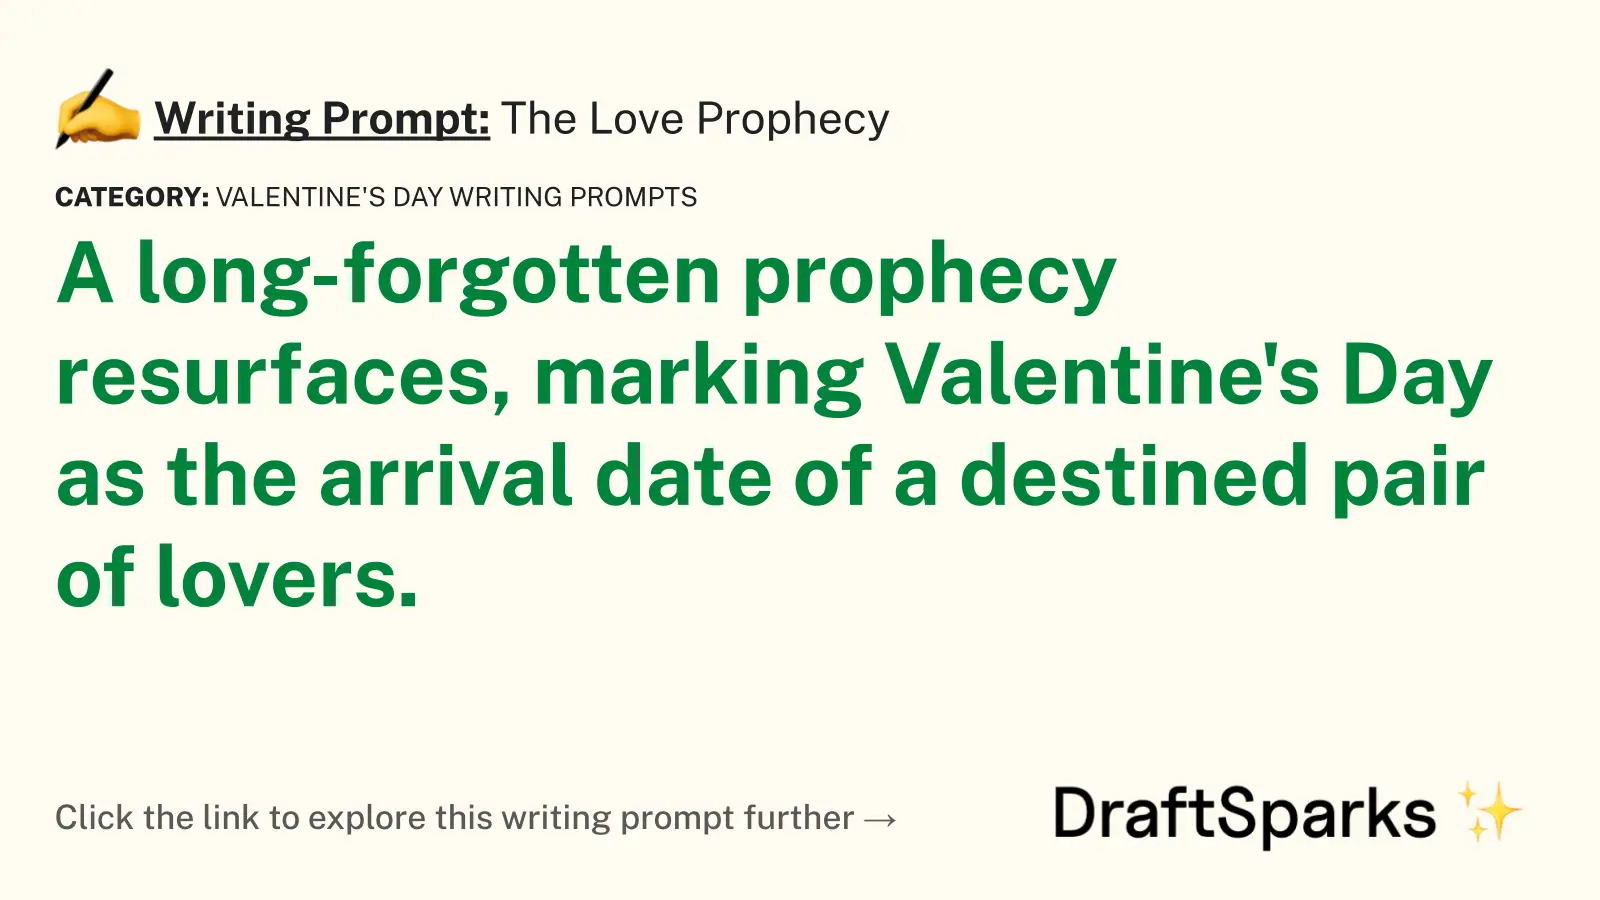 The Love Prophecy